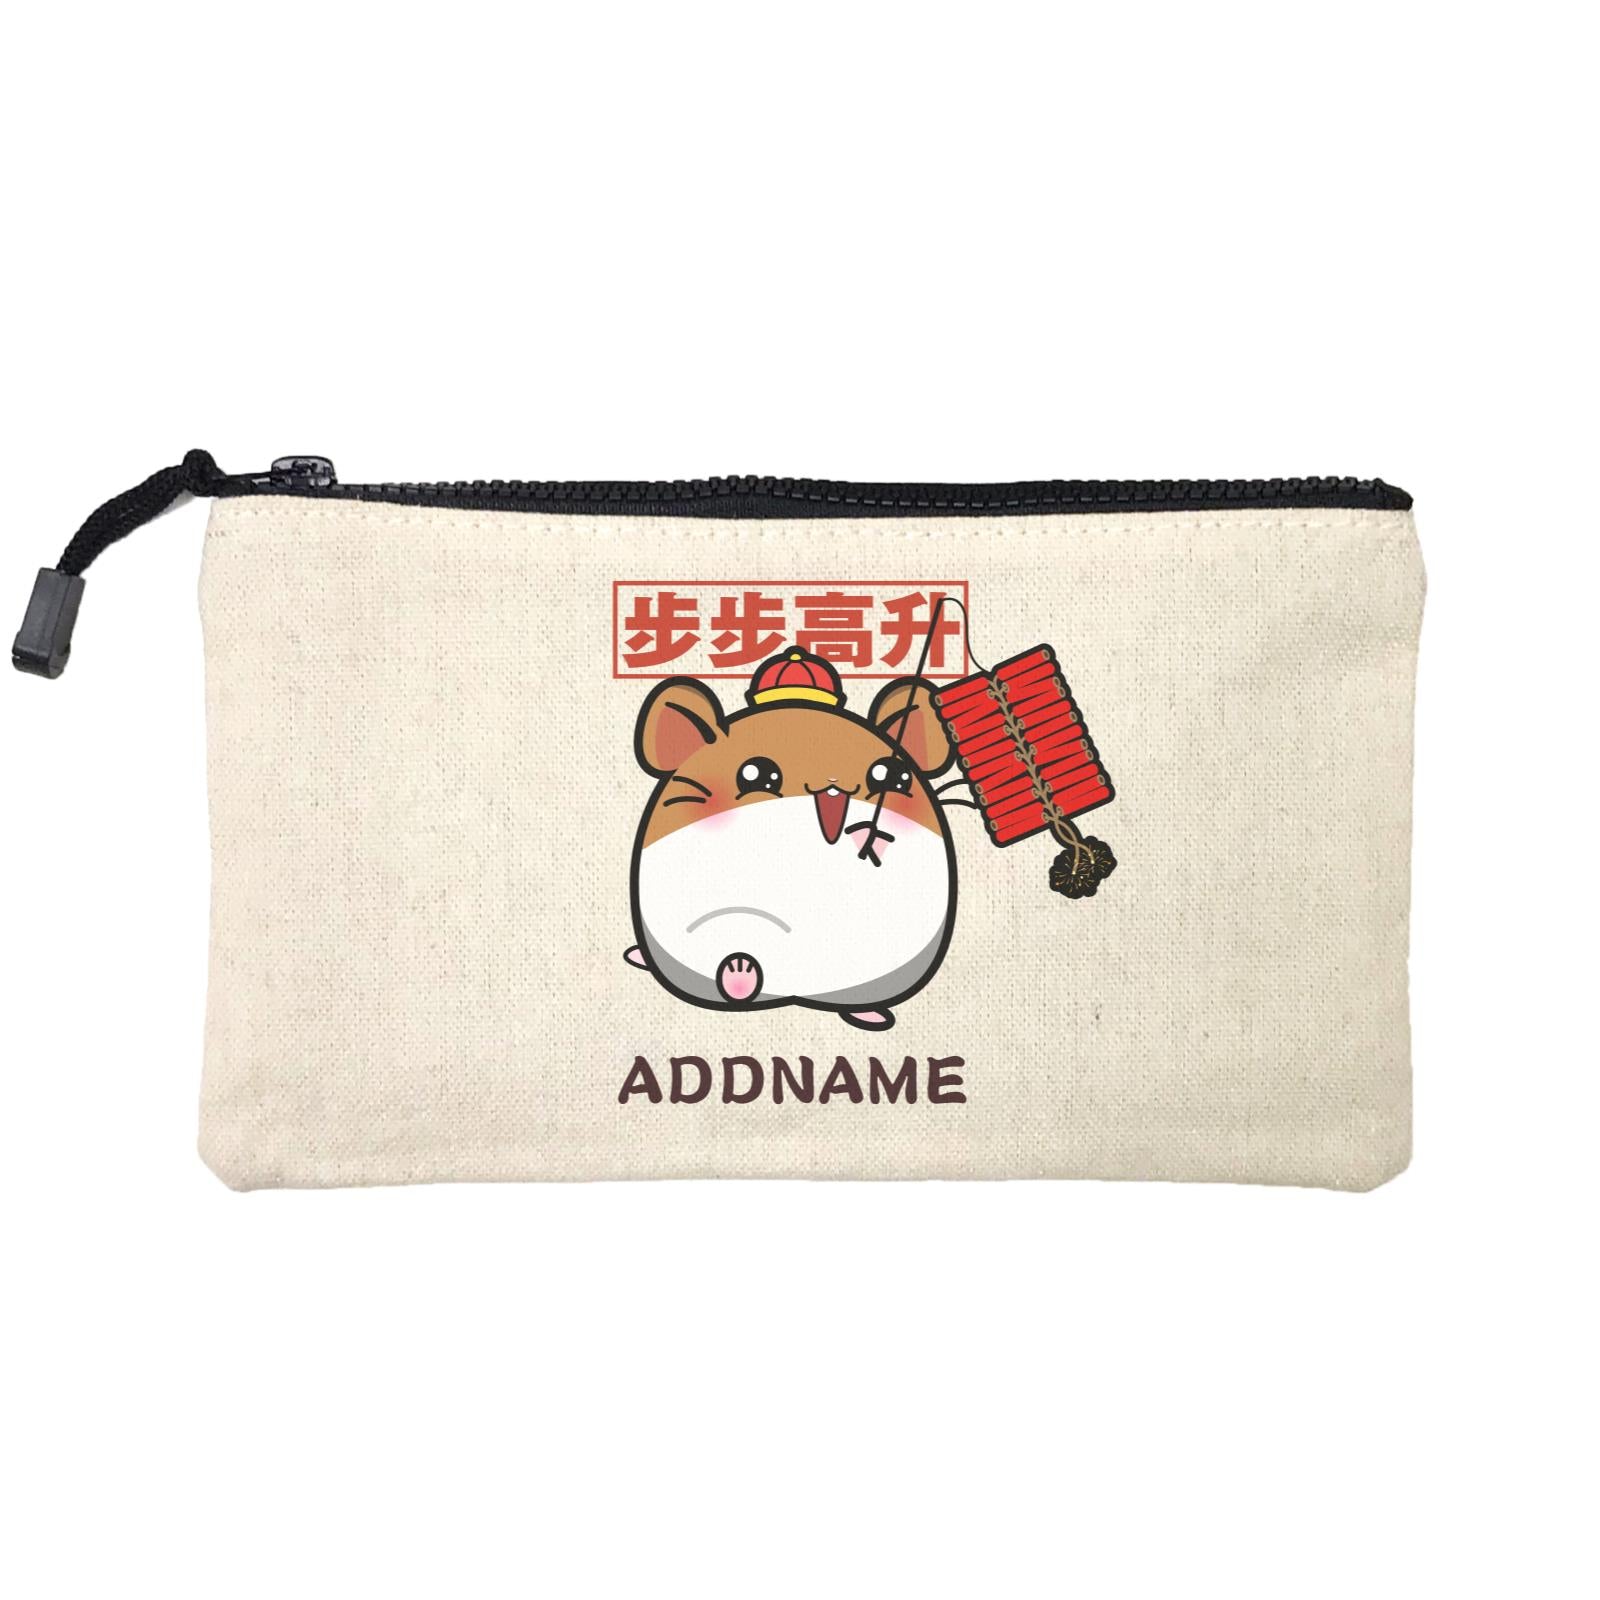 Prosperous Mouse Series Cracker Hamster Onwards And Upwards Mini Accessories Stationery Pouch